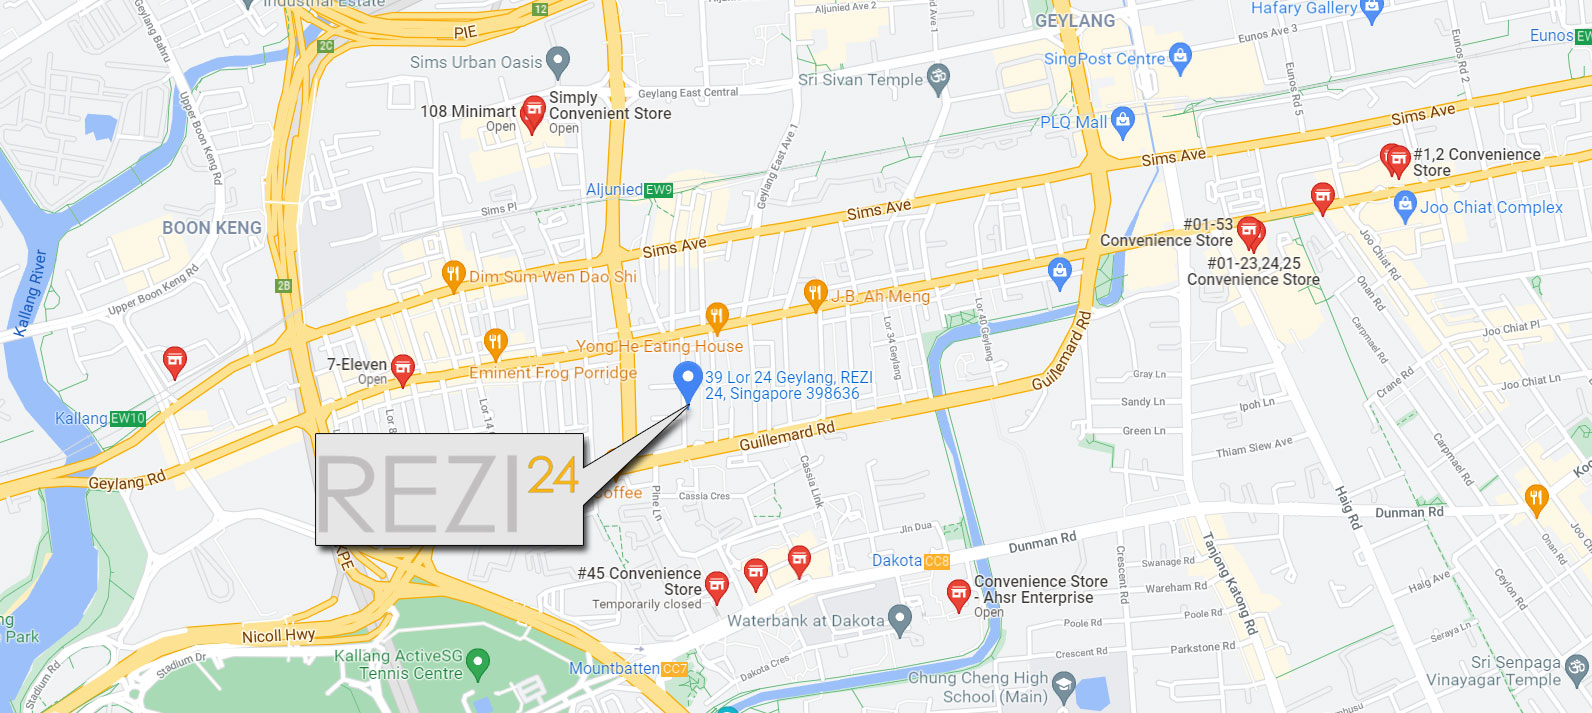 Looking at the location map, it can be seen that Rezi24 is located near convenience stores and you can walk right there